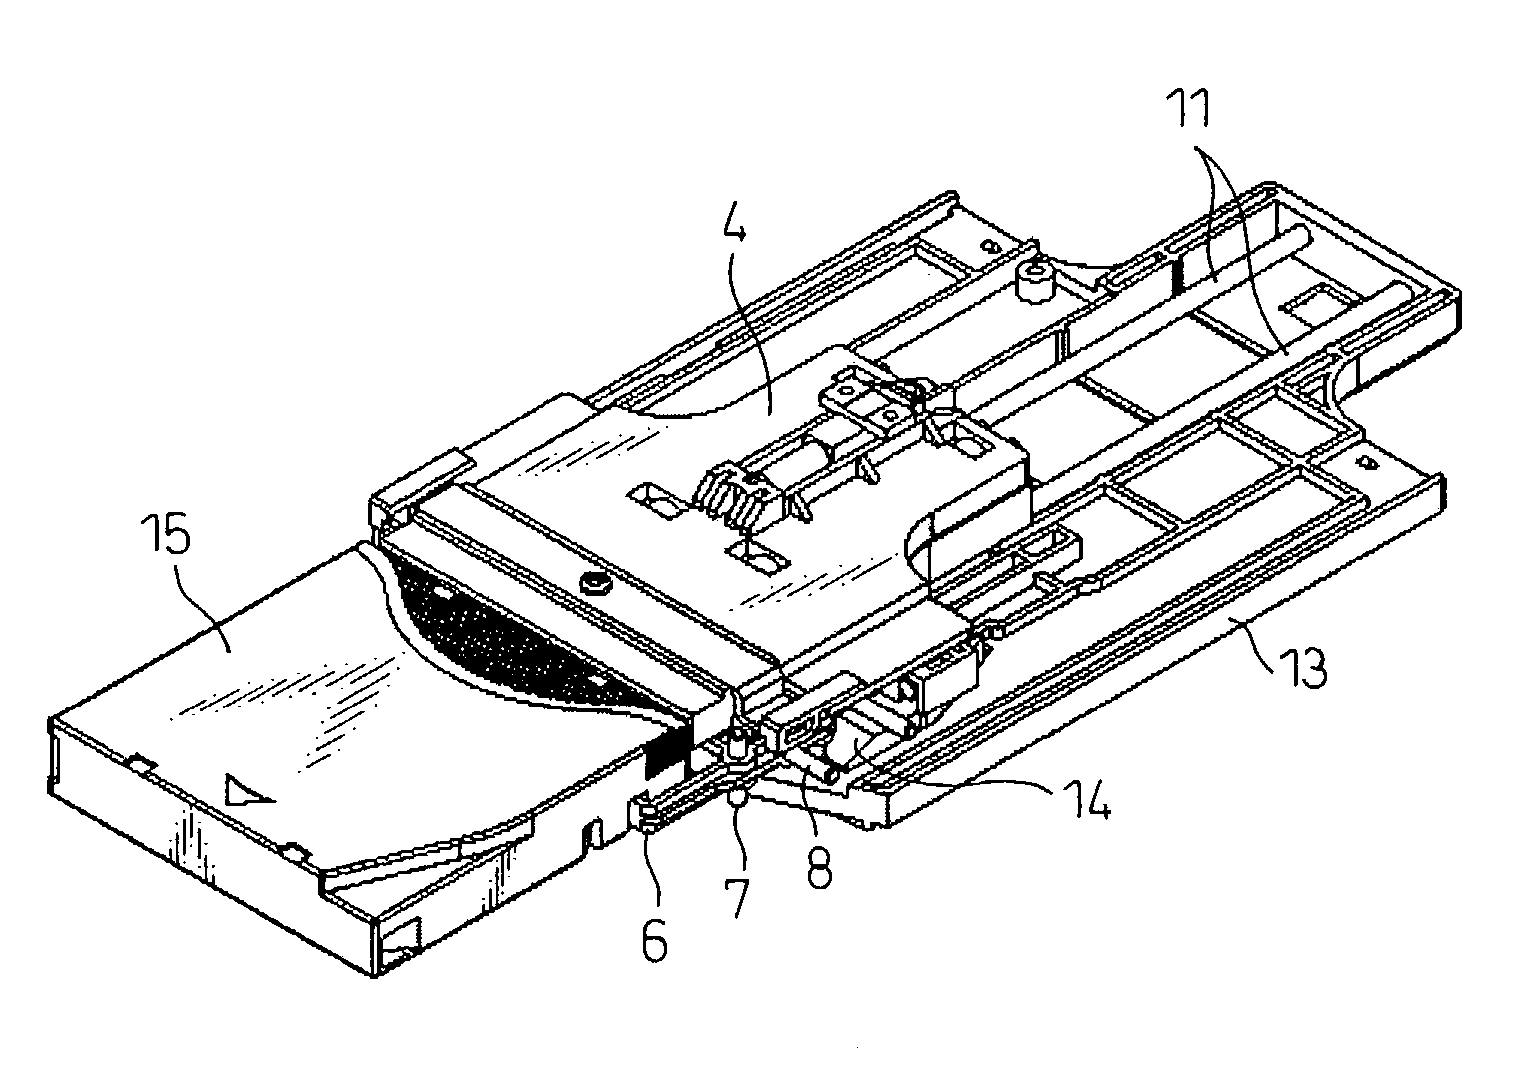 Robot hand for transferring an article in a housing, and a library apparatus equipped with the robot hand for transferring and article stored in a rack